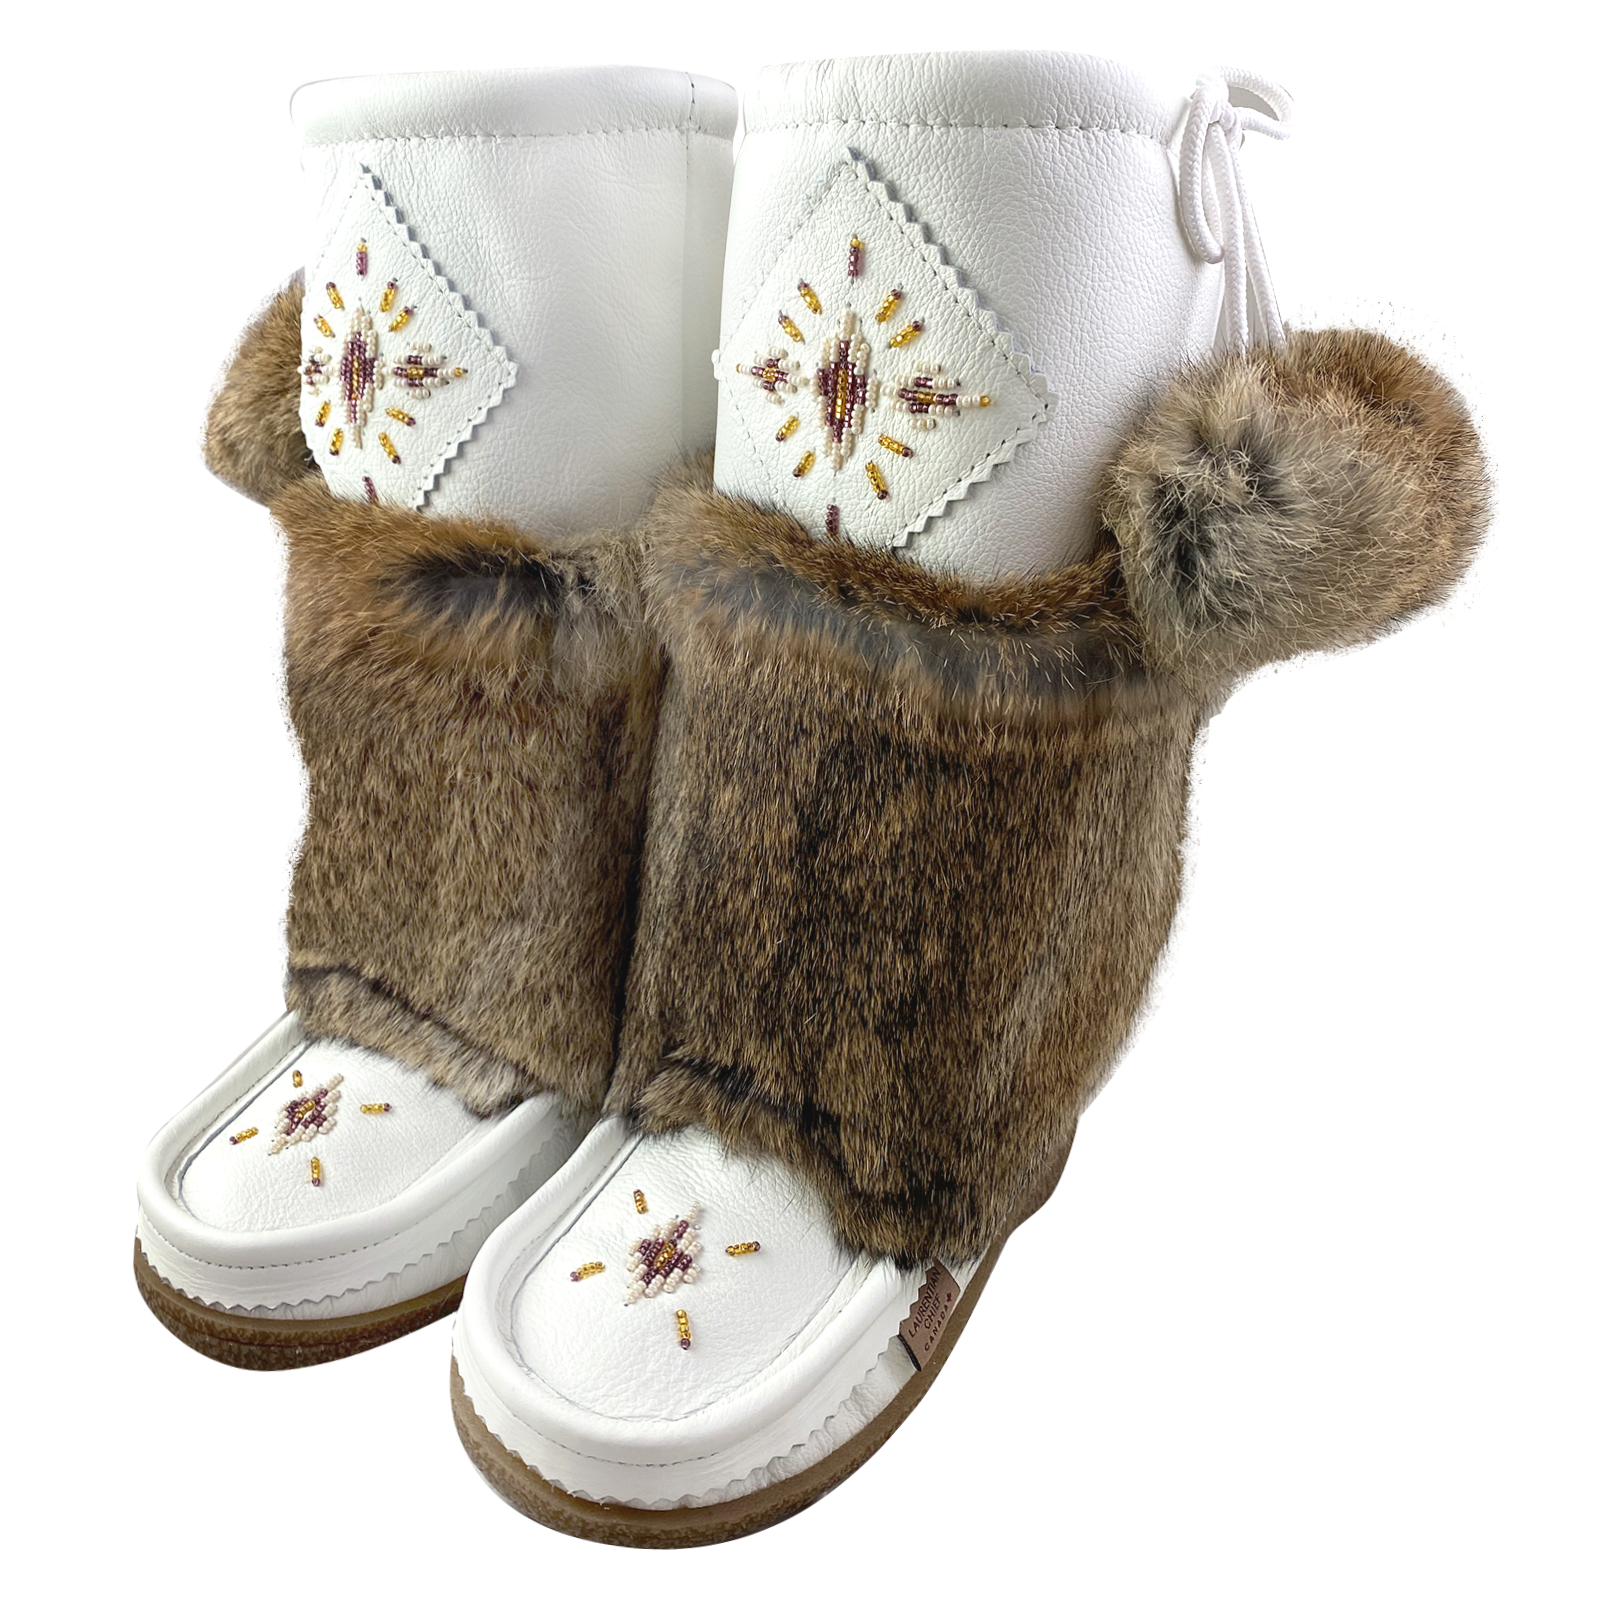 Women's Genuine Leather Brown & White Mukluk Winter Boots – Moccasins Canada